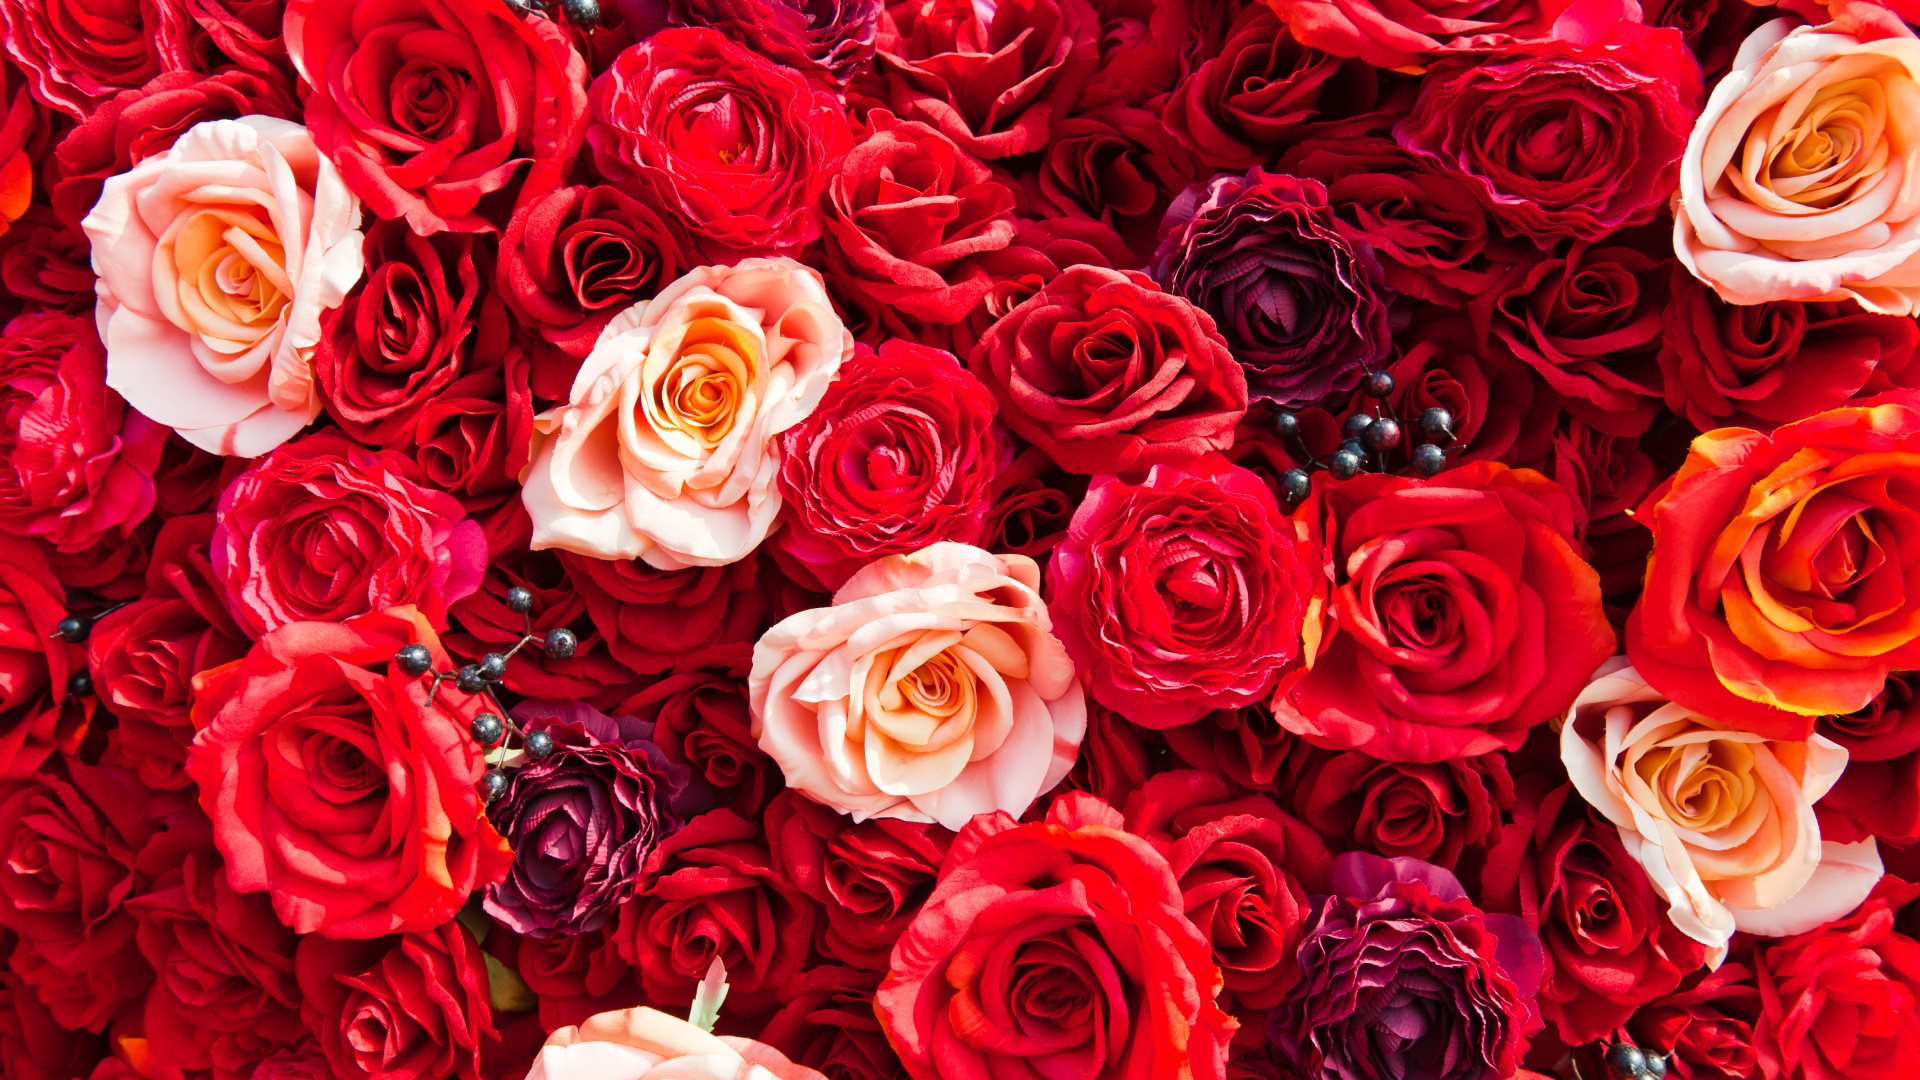 Red and White Roses Bouquet. Wallpaper in 1920x1080 Resolution